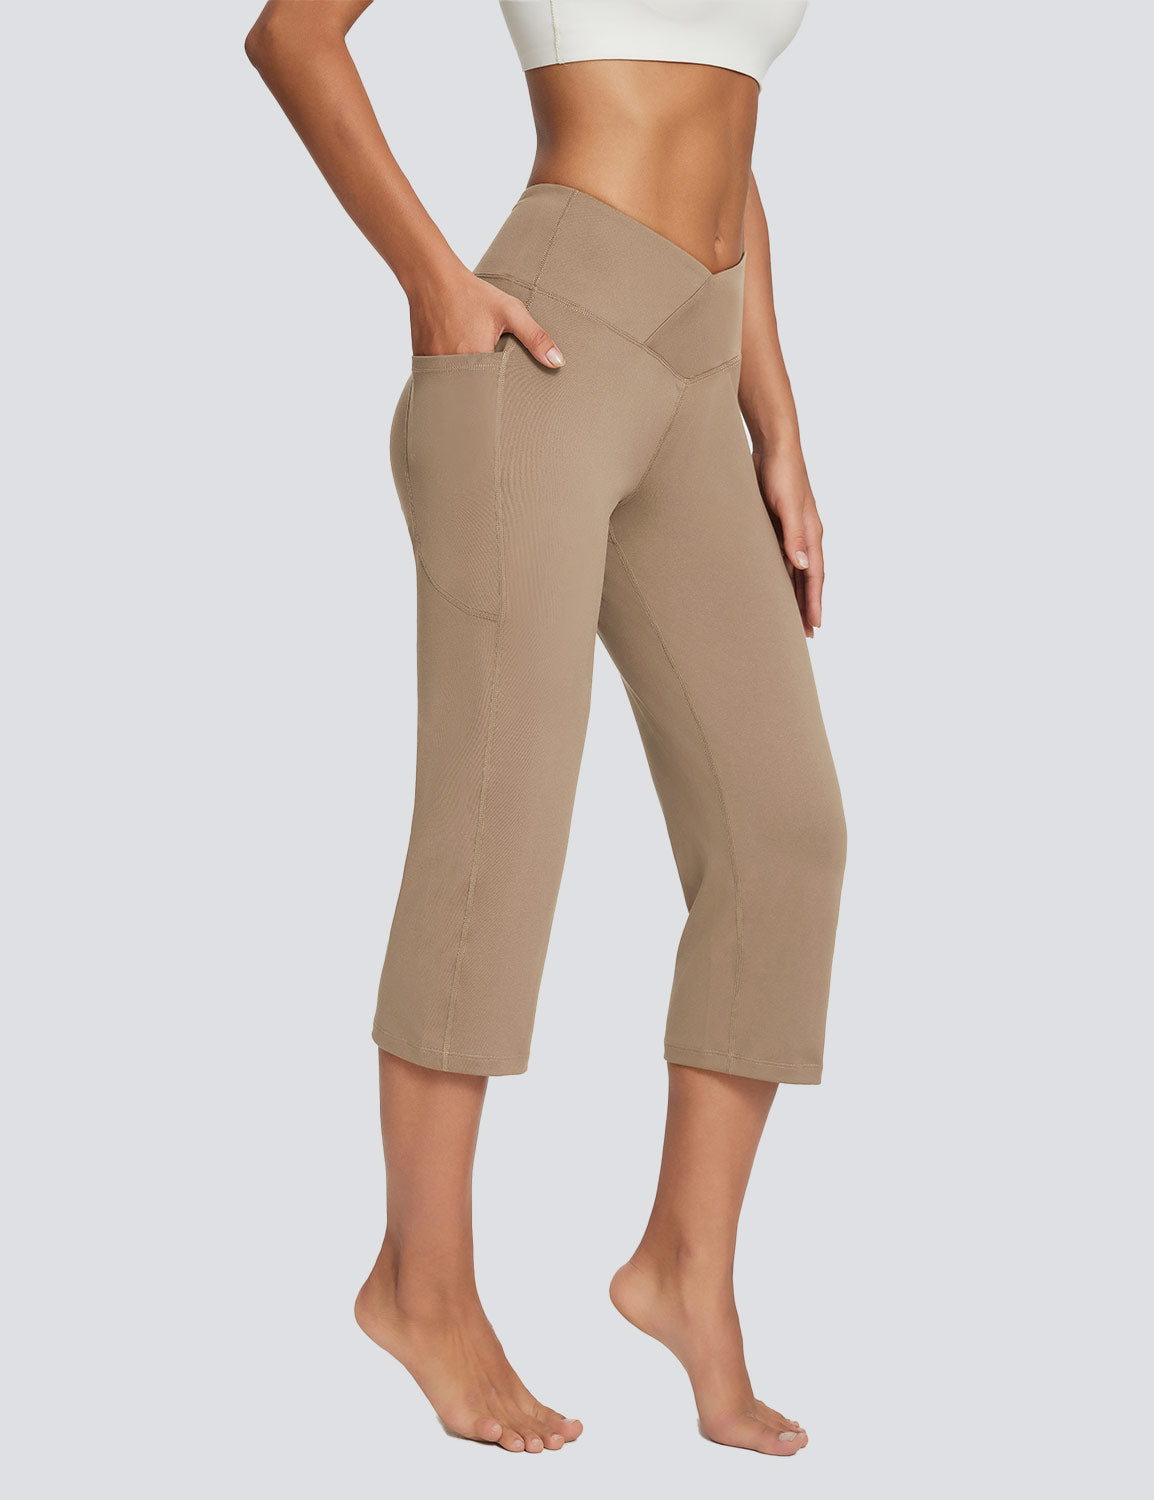 Baleaf Women's Skin-friendly Crossover High Rise Pants Cocoa Crème Side